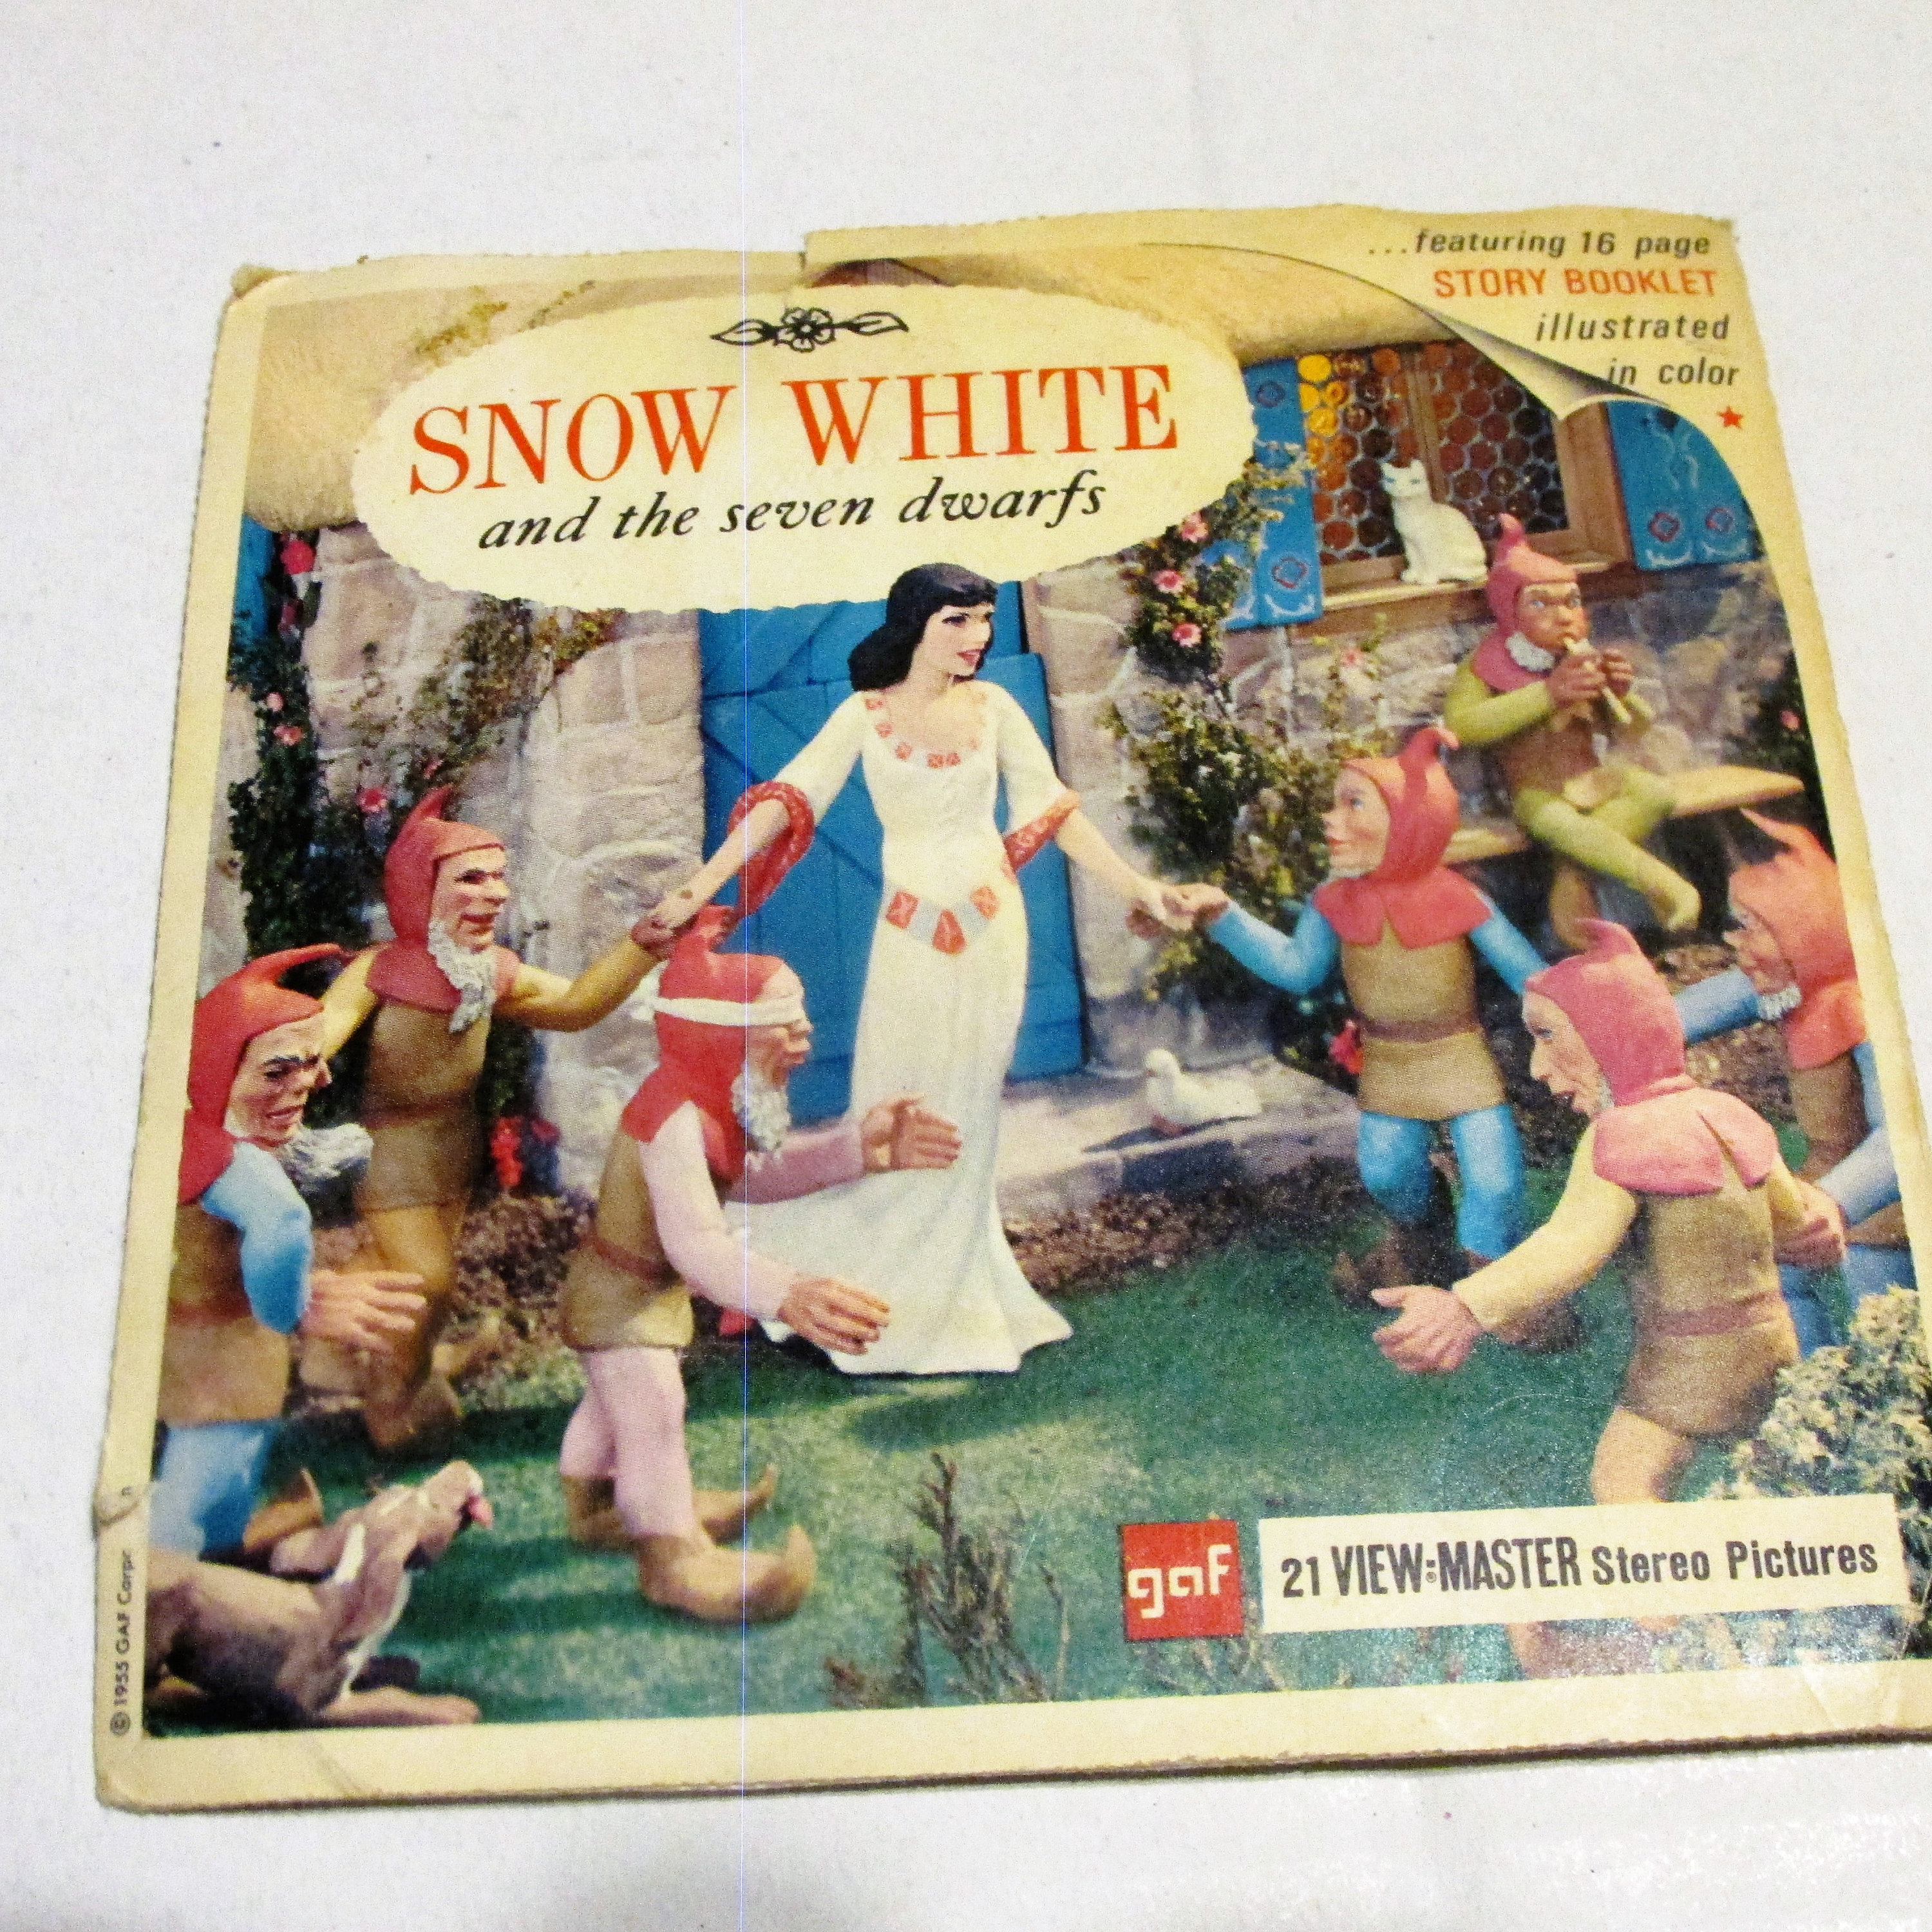 Disney Snow White and the Seven Dwarfs, 3 Reel Viewer Master